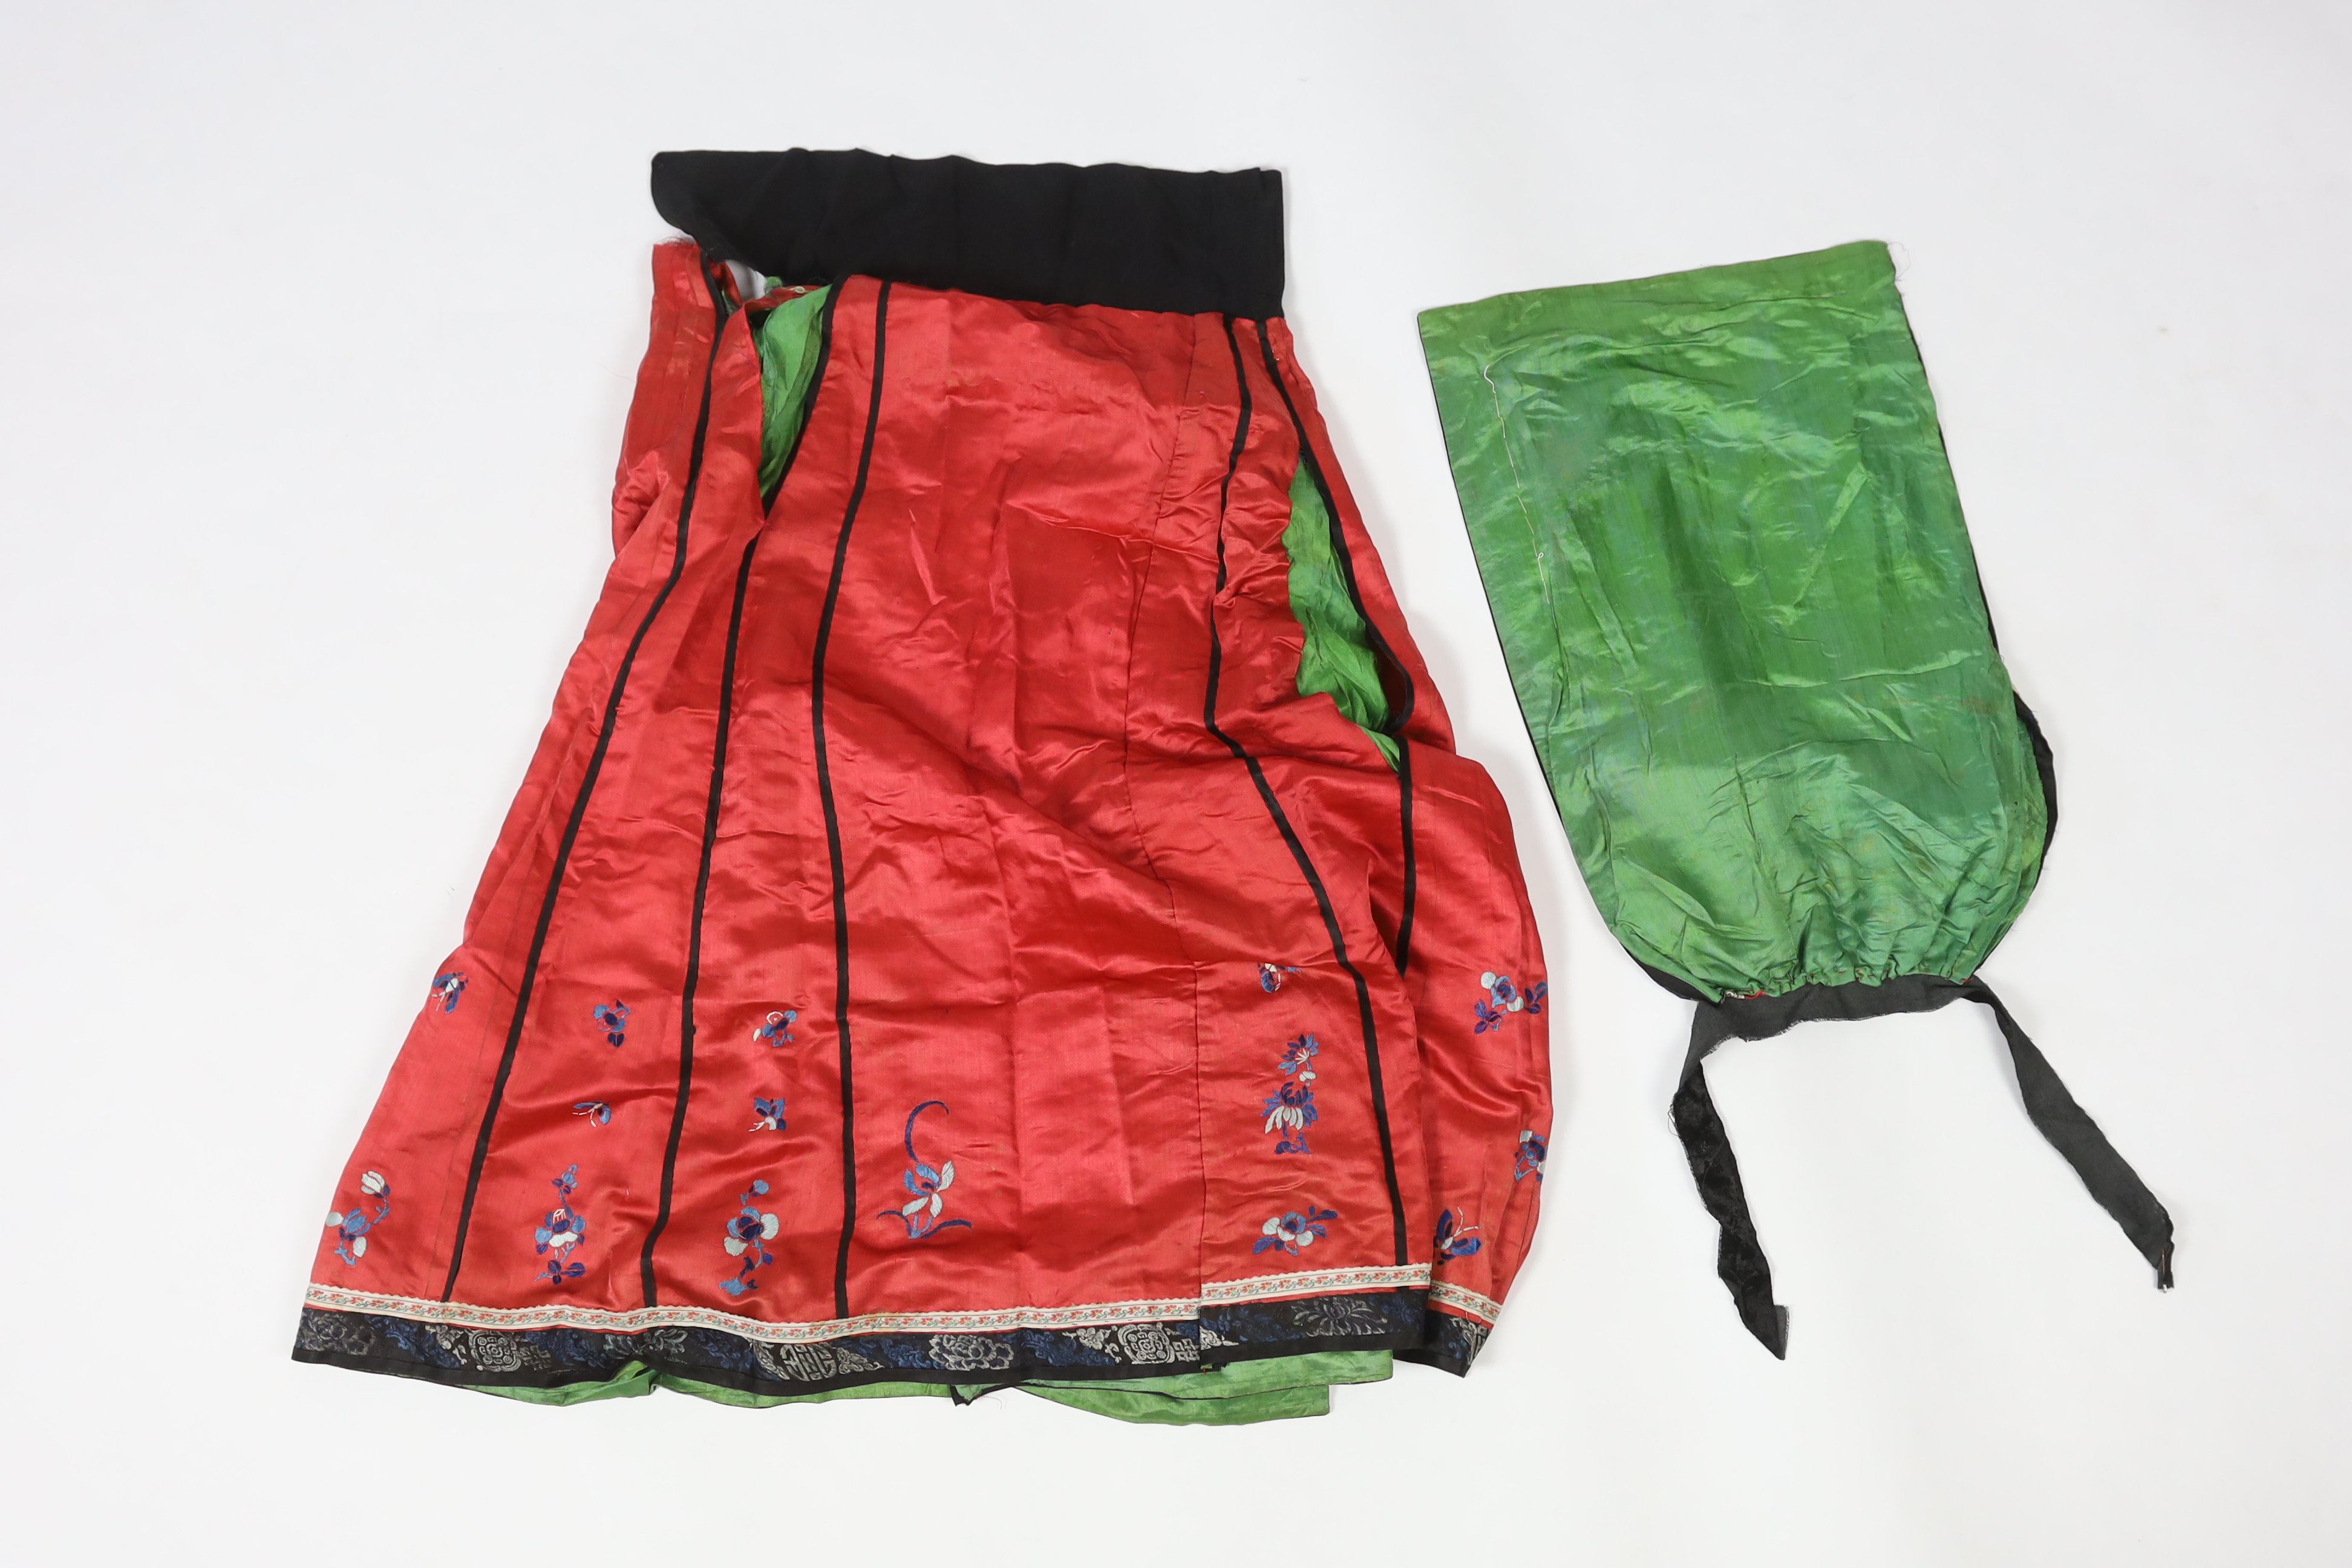 A Chinese red silk skirt, embroidered with a blue silk panel of Chinese knotting flowers and auspicious symbols, the bottom of the skirt with spot motifs bordered with embroidered braiding and ribbon, the slant is lined